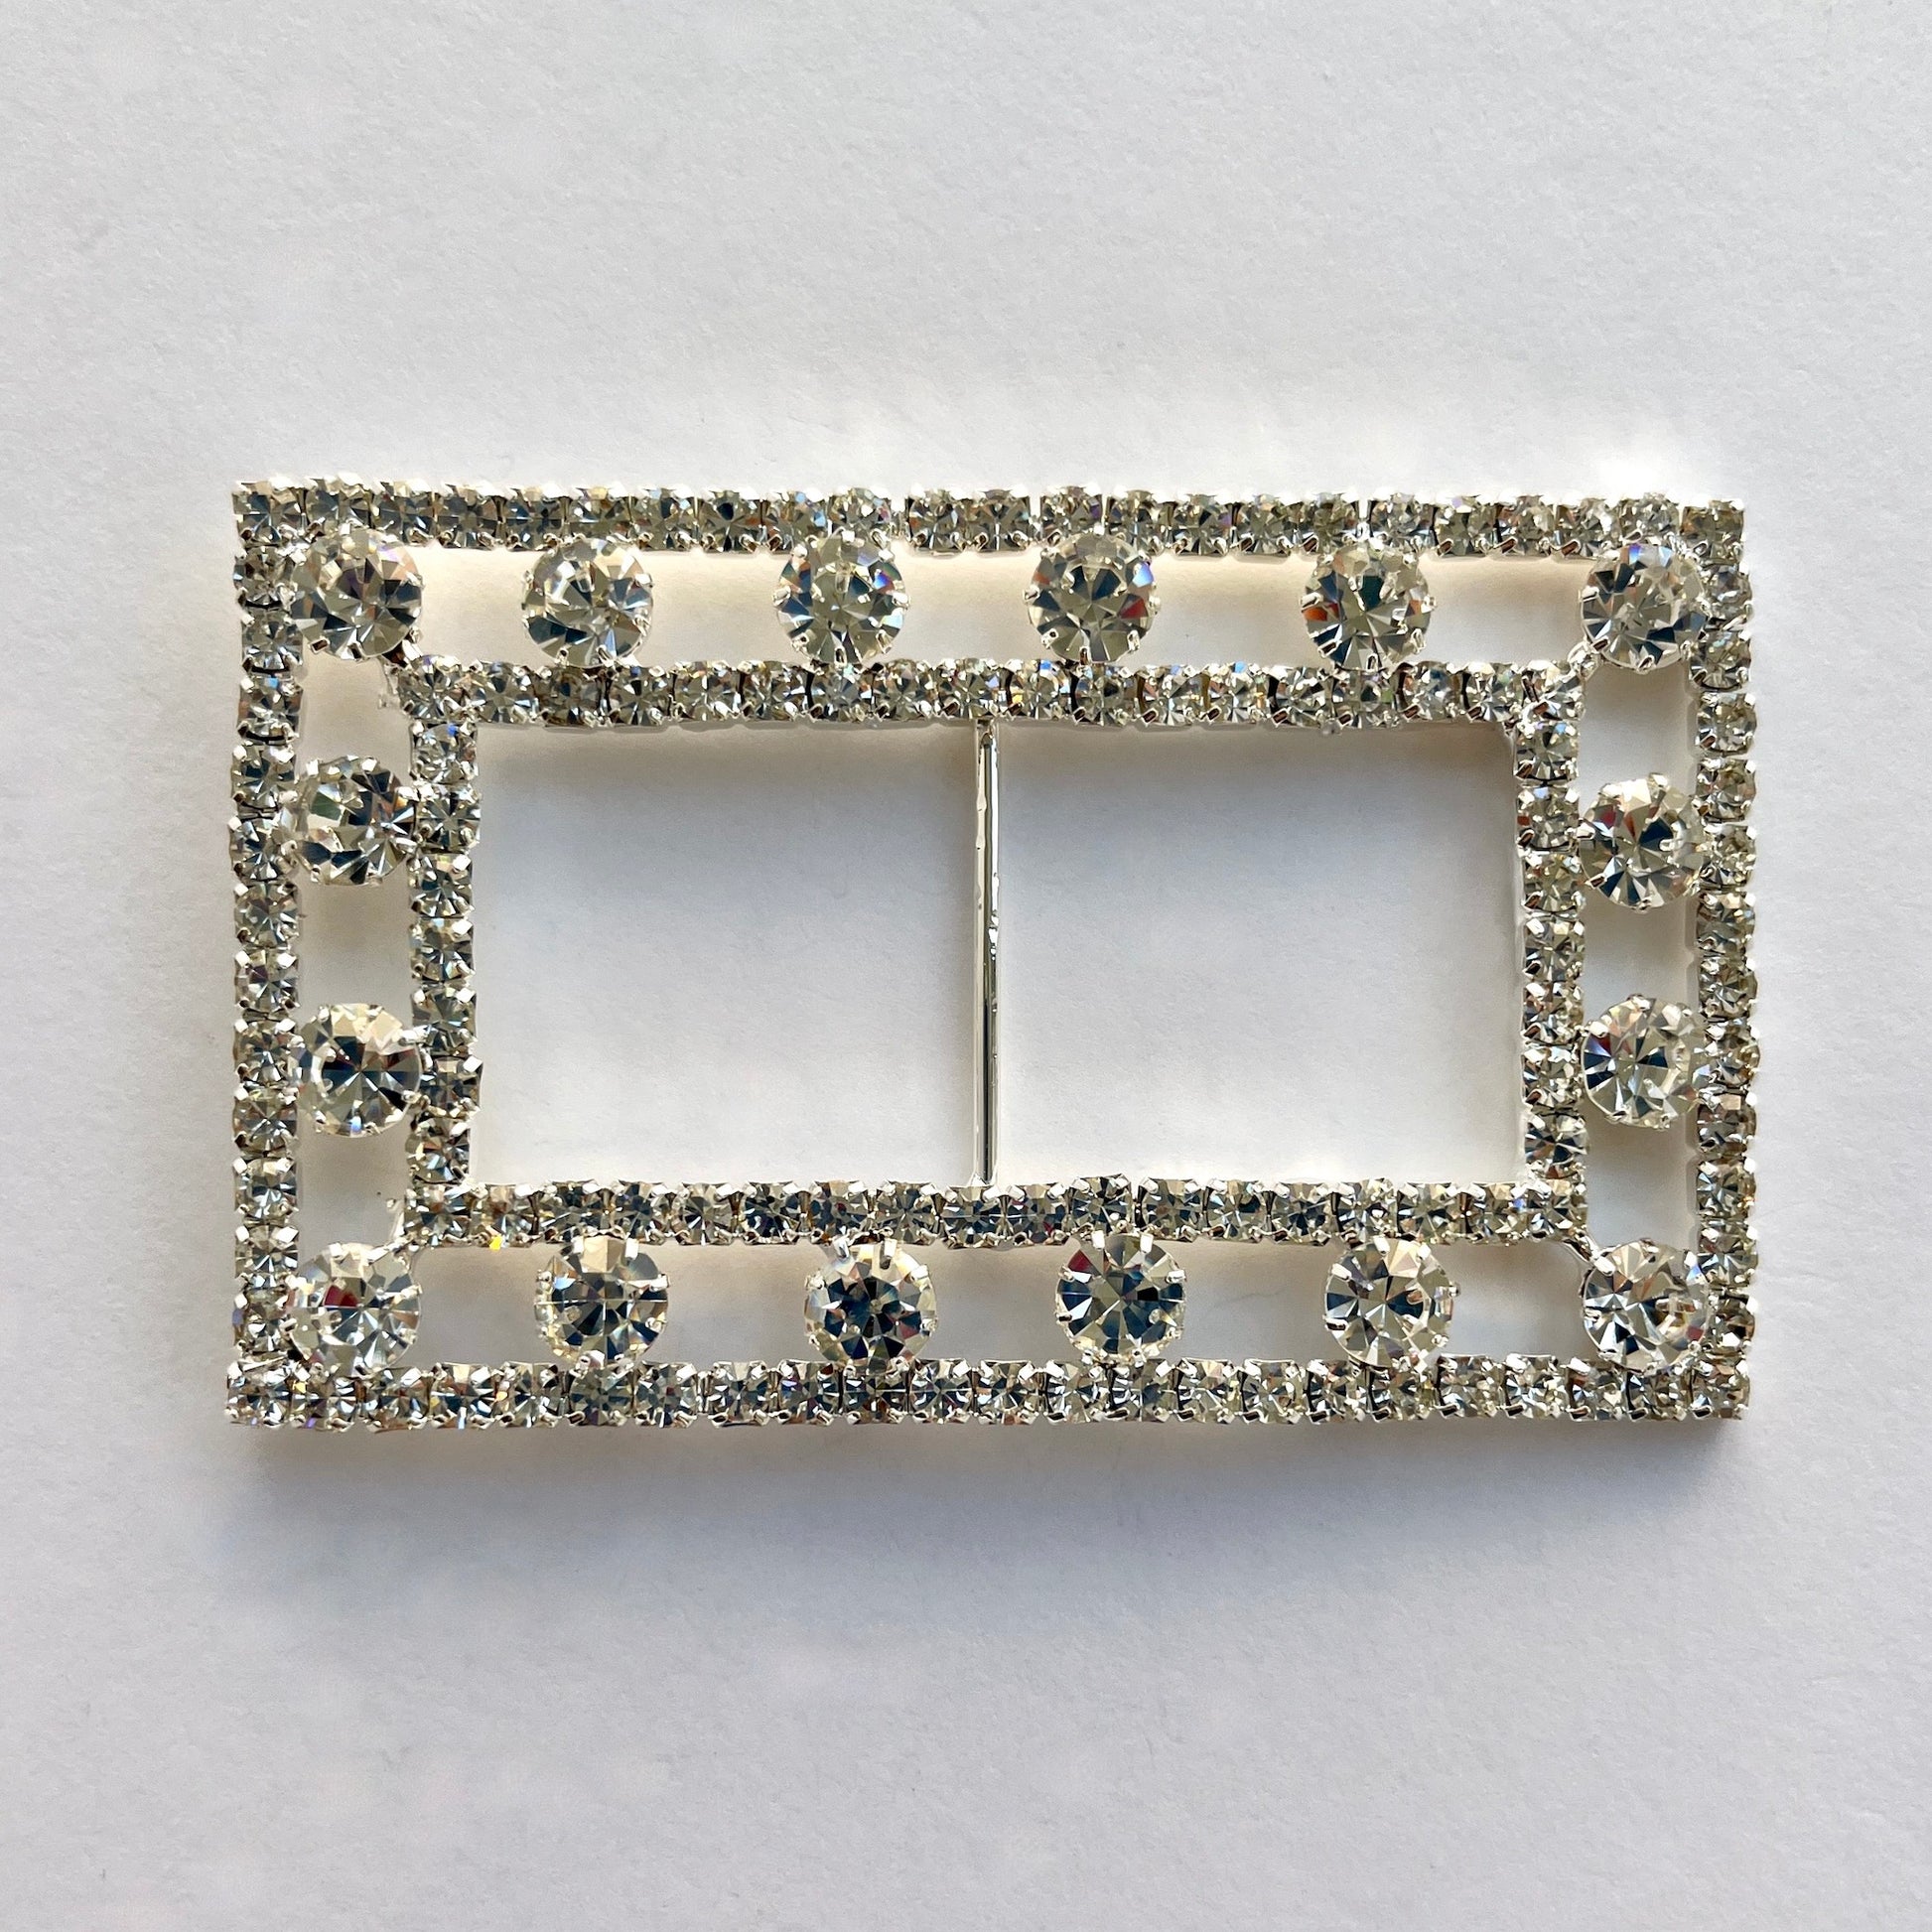 Large gold rectangle diamante slider buckle, pirate buckle, Use as a belt buckle, an accent for straps, dressmaking projects or as an embellishment for handbags, wedding invitations, wedding favours, napkin rings and arts and craft projects. Would fit an approximate belt or strap width of 2.5cm (1”)